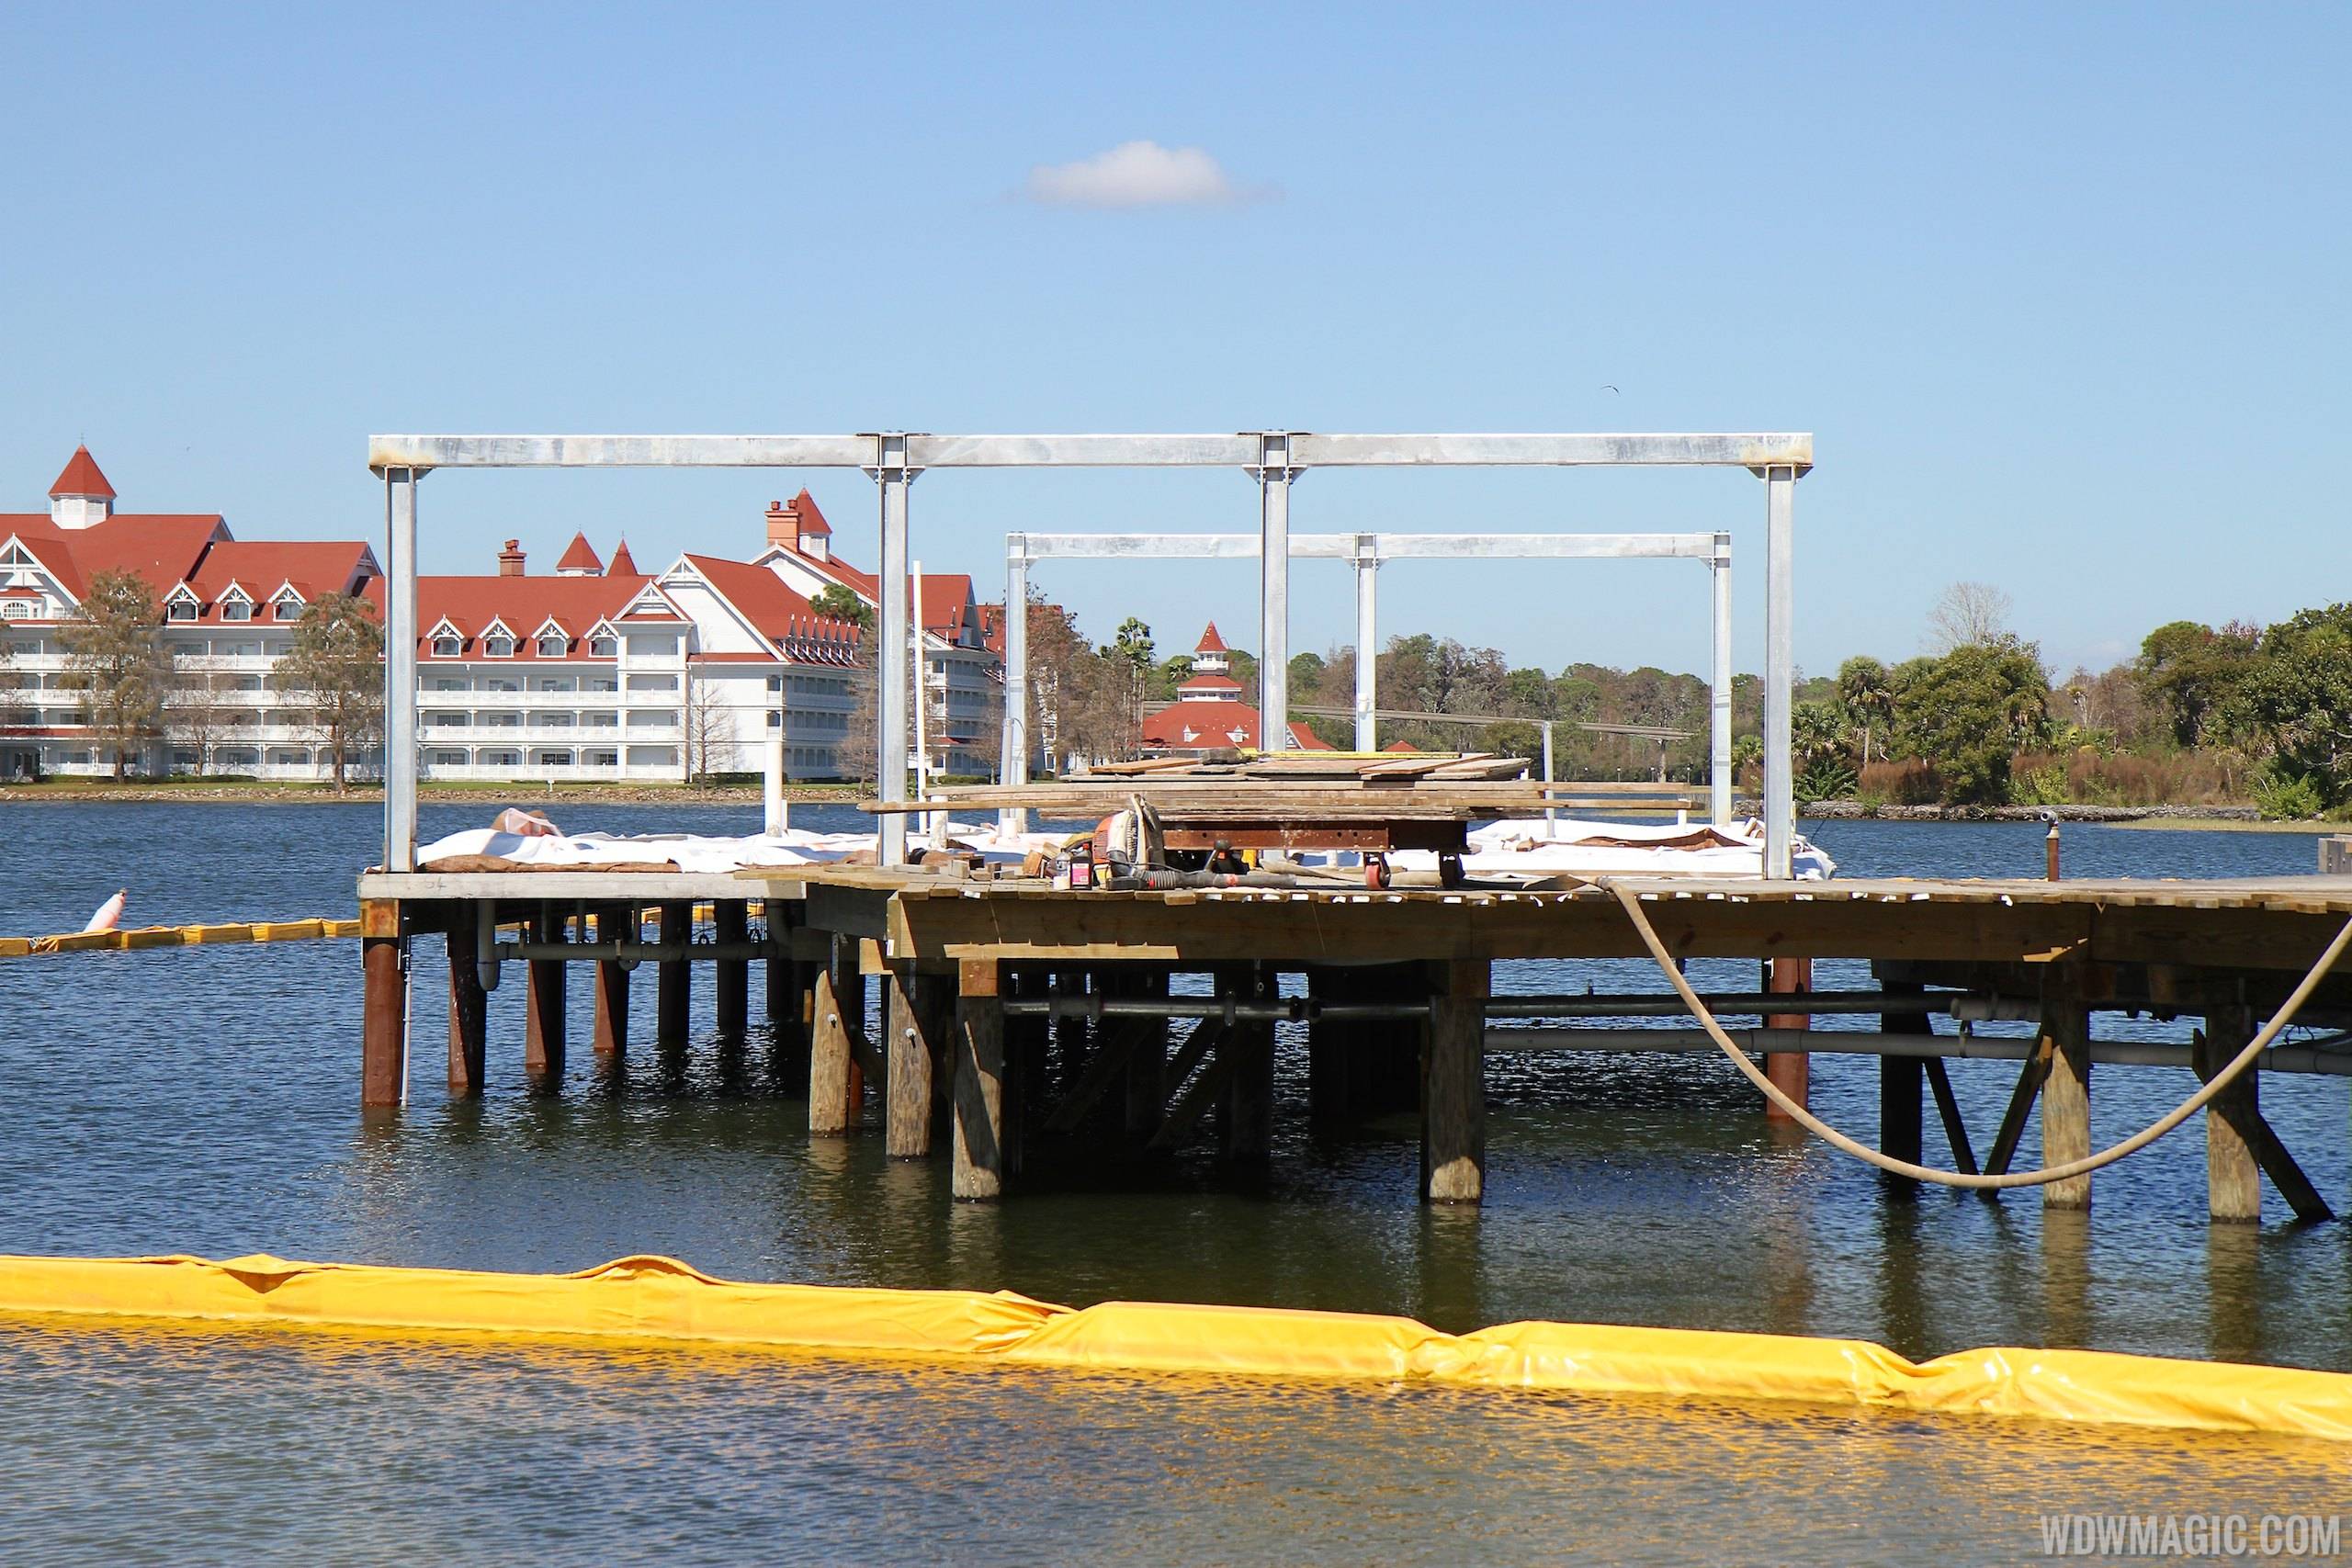 PHOTOS - Rooms now taking shape on the water at the Polynesian Resort Villas